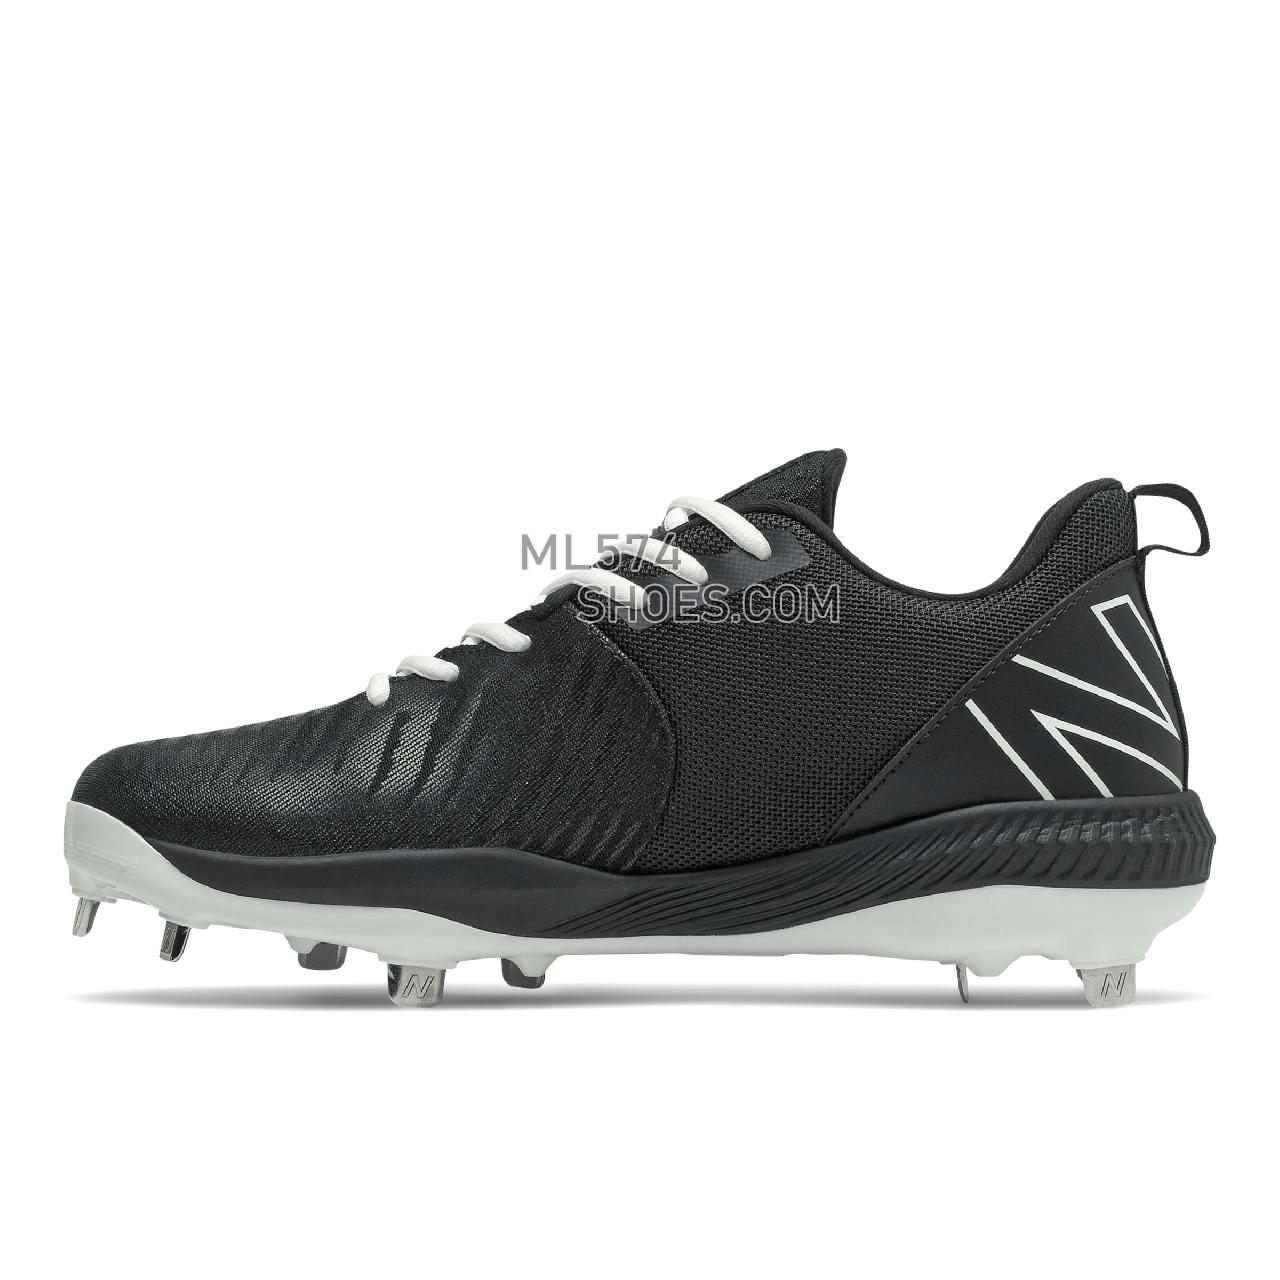 New Balance FuelCell 4040 v6 Metal - Men's Mid-Cut Baseball Cleats - Black with White - L4040BK6